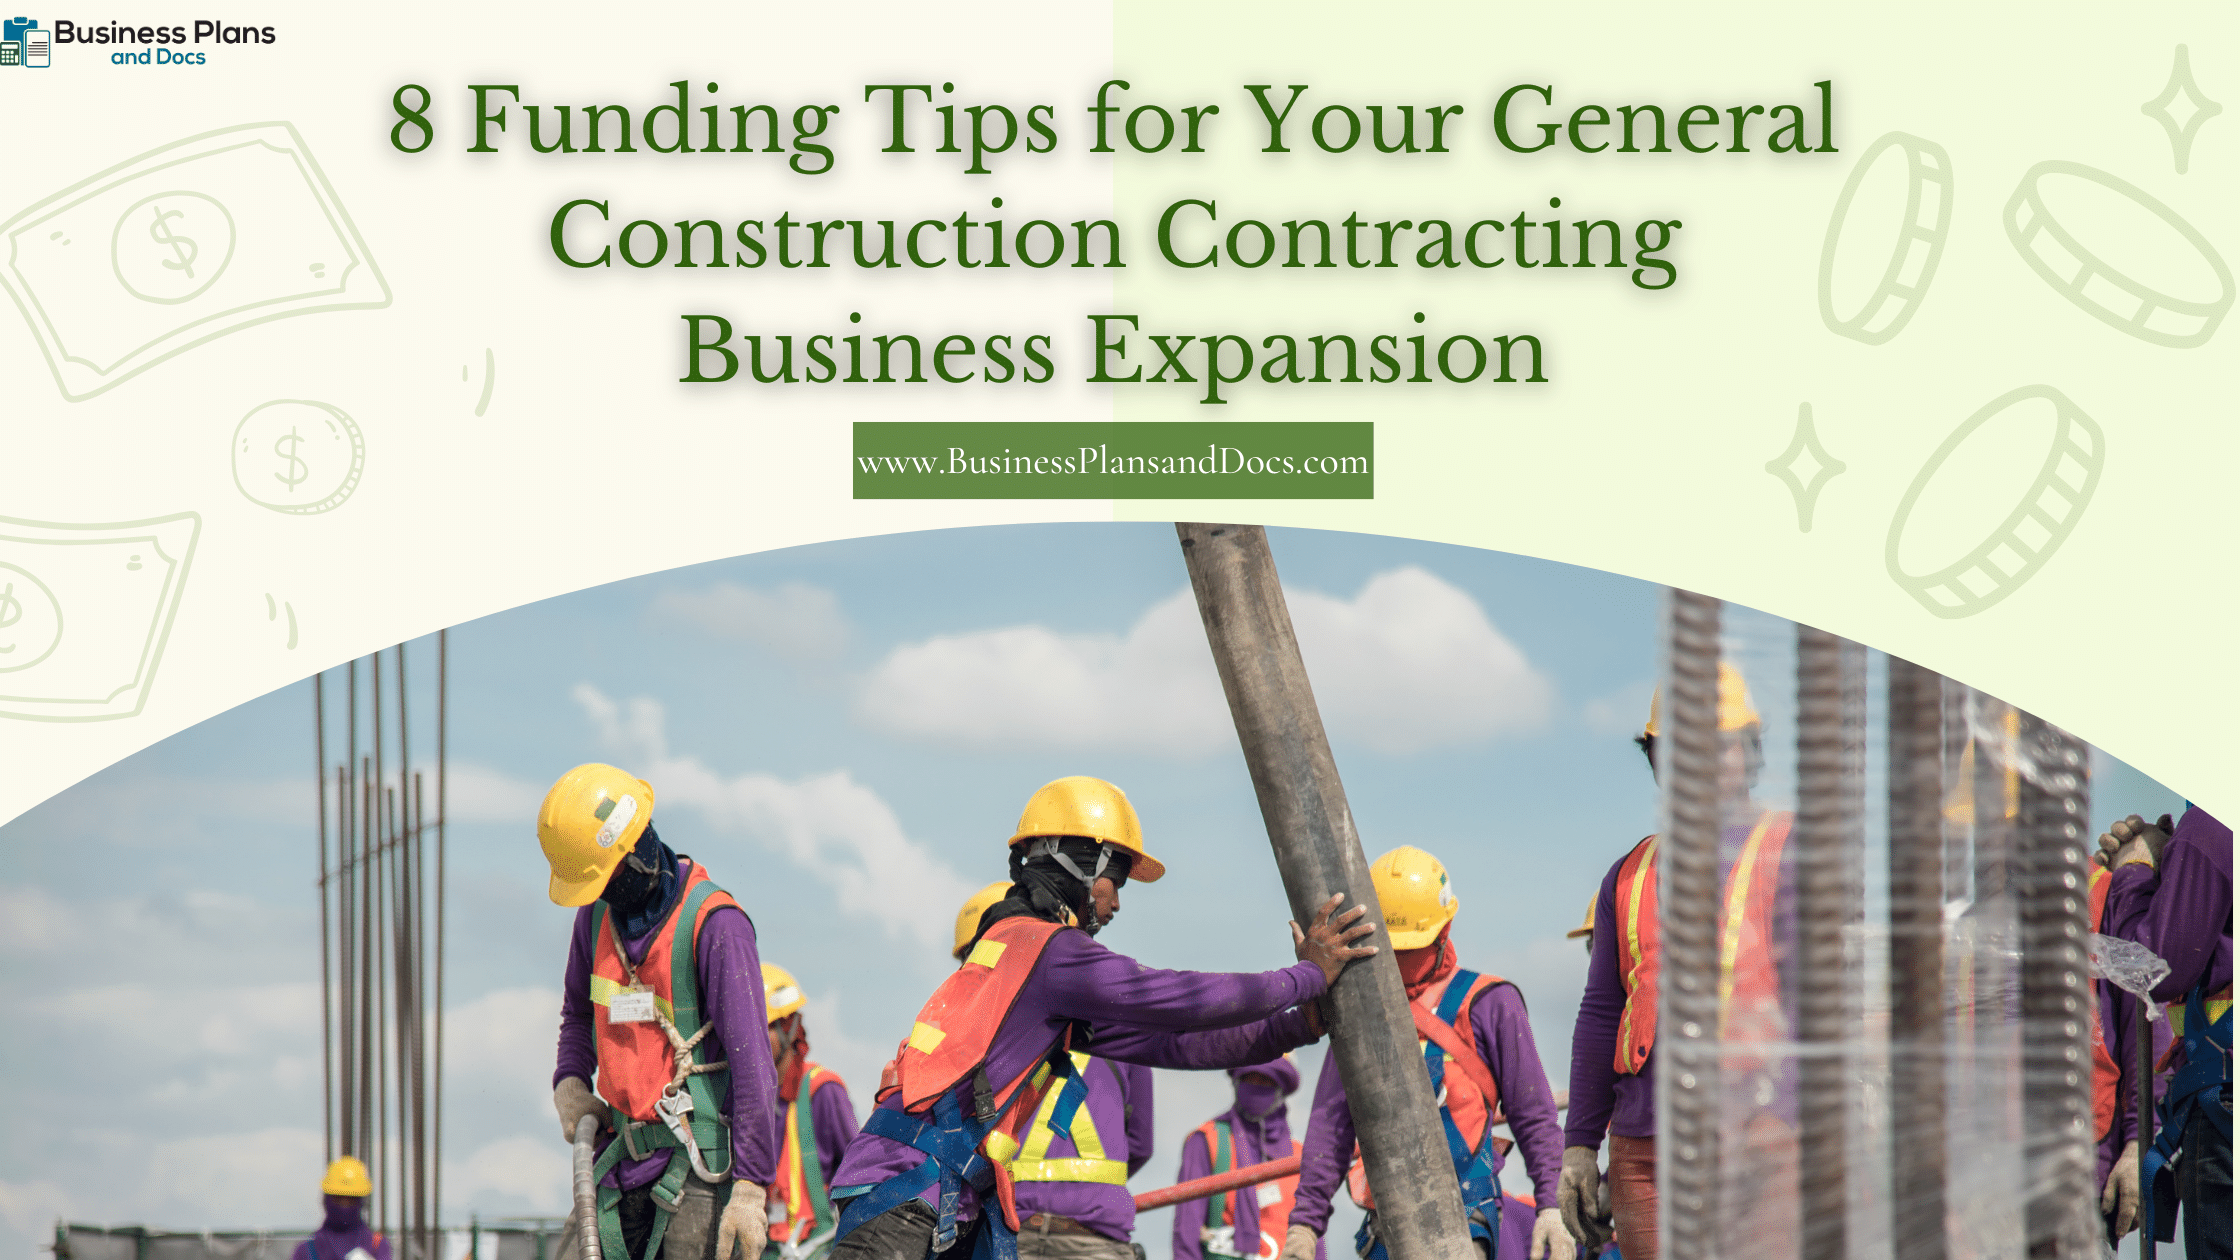 8 Funding Tips for Your General Construction Contracting Business Expansion